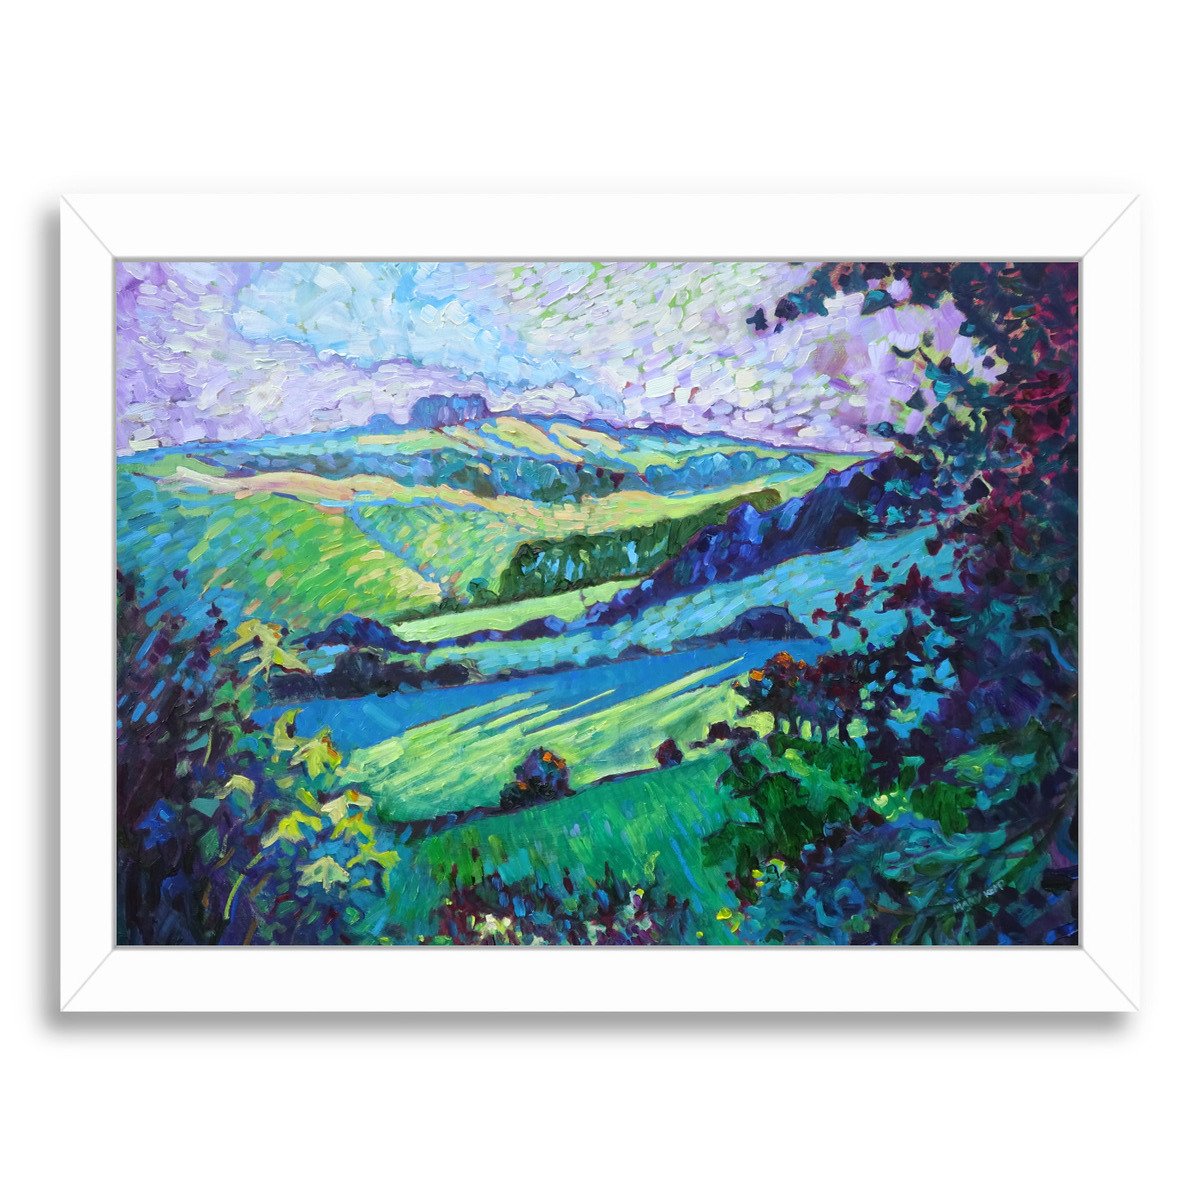 Derbyshire Hills By Mary Kemp - Framed Print - Americanflat